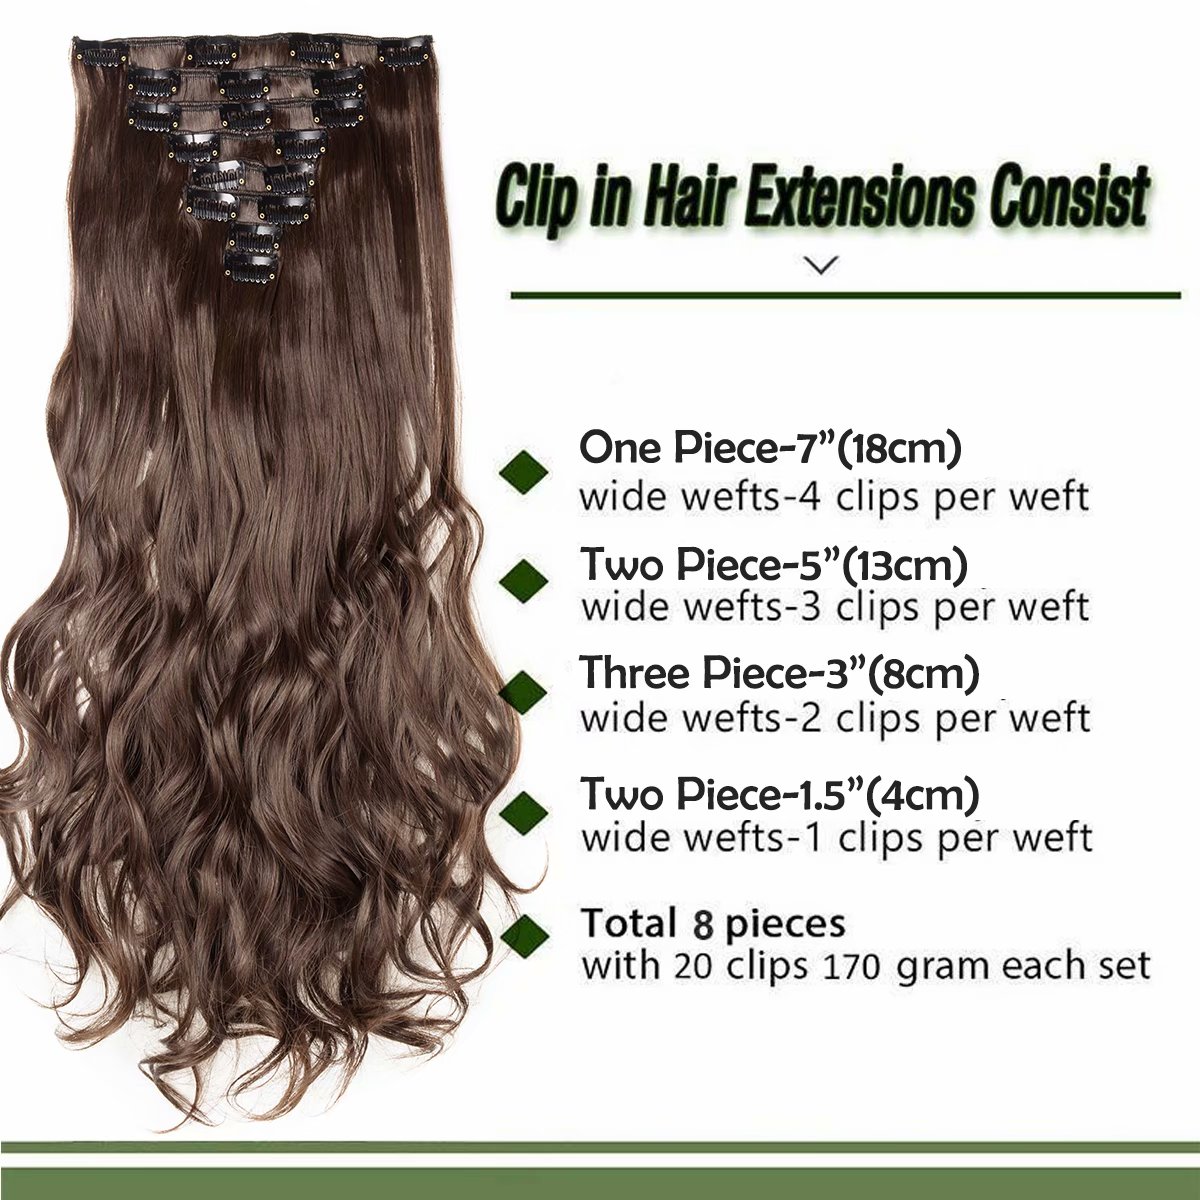 Benehair Clip in Hair Extensions Full Head Long Thick 8 Pieces Hair 18 Clips Curly Wavy Straight Hairpieces 100% Real Natural as Human Best Hair Set 17'' Curly Medium Brown - image 4 of 11